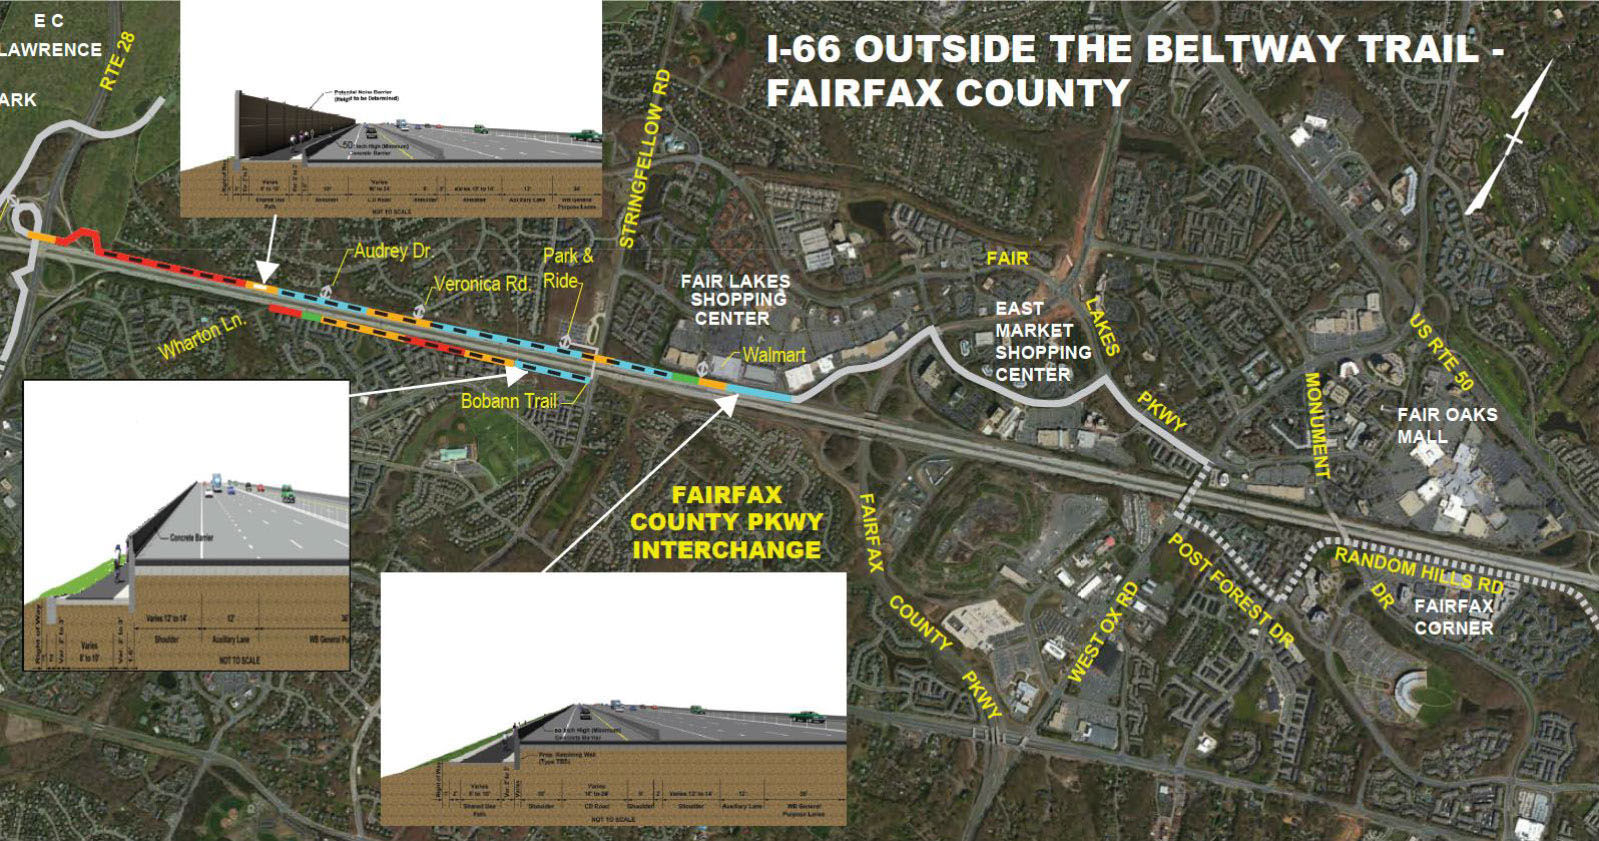 The layouts and path of parts of the proposed trail. (Courtesy VDOT/FAM)